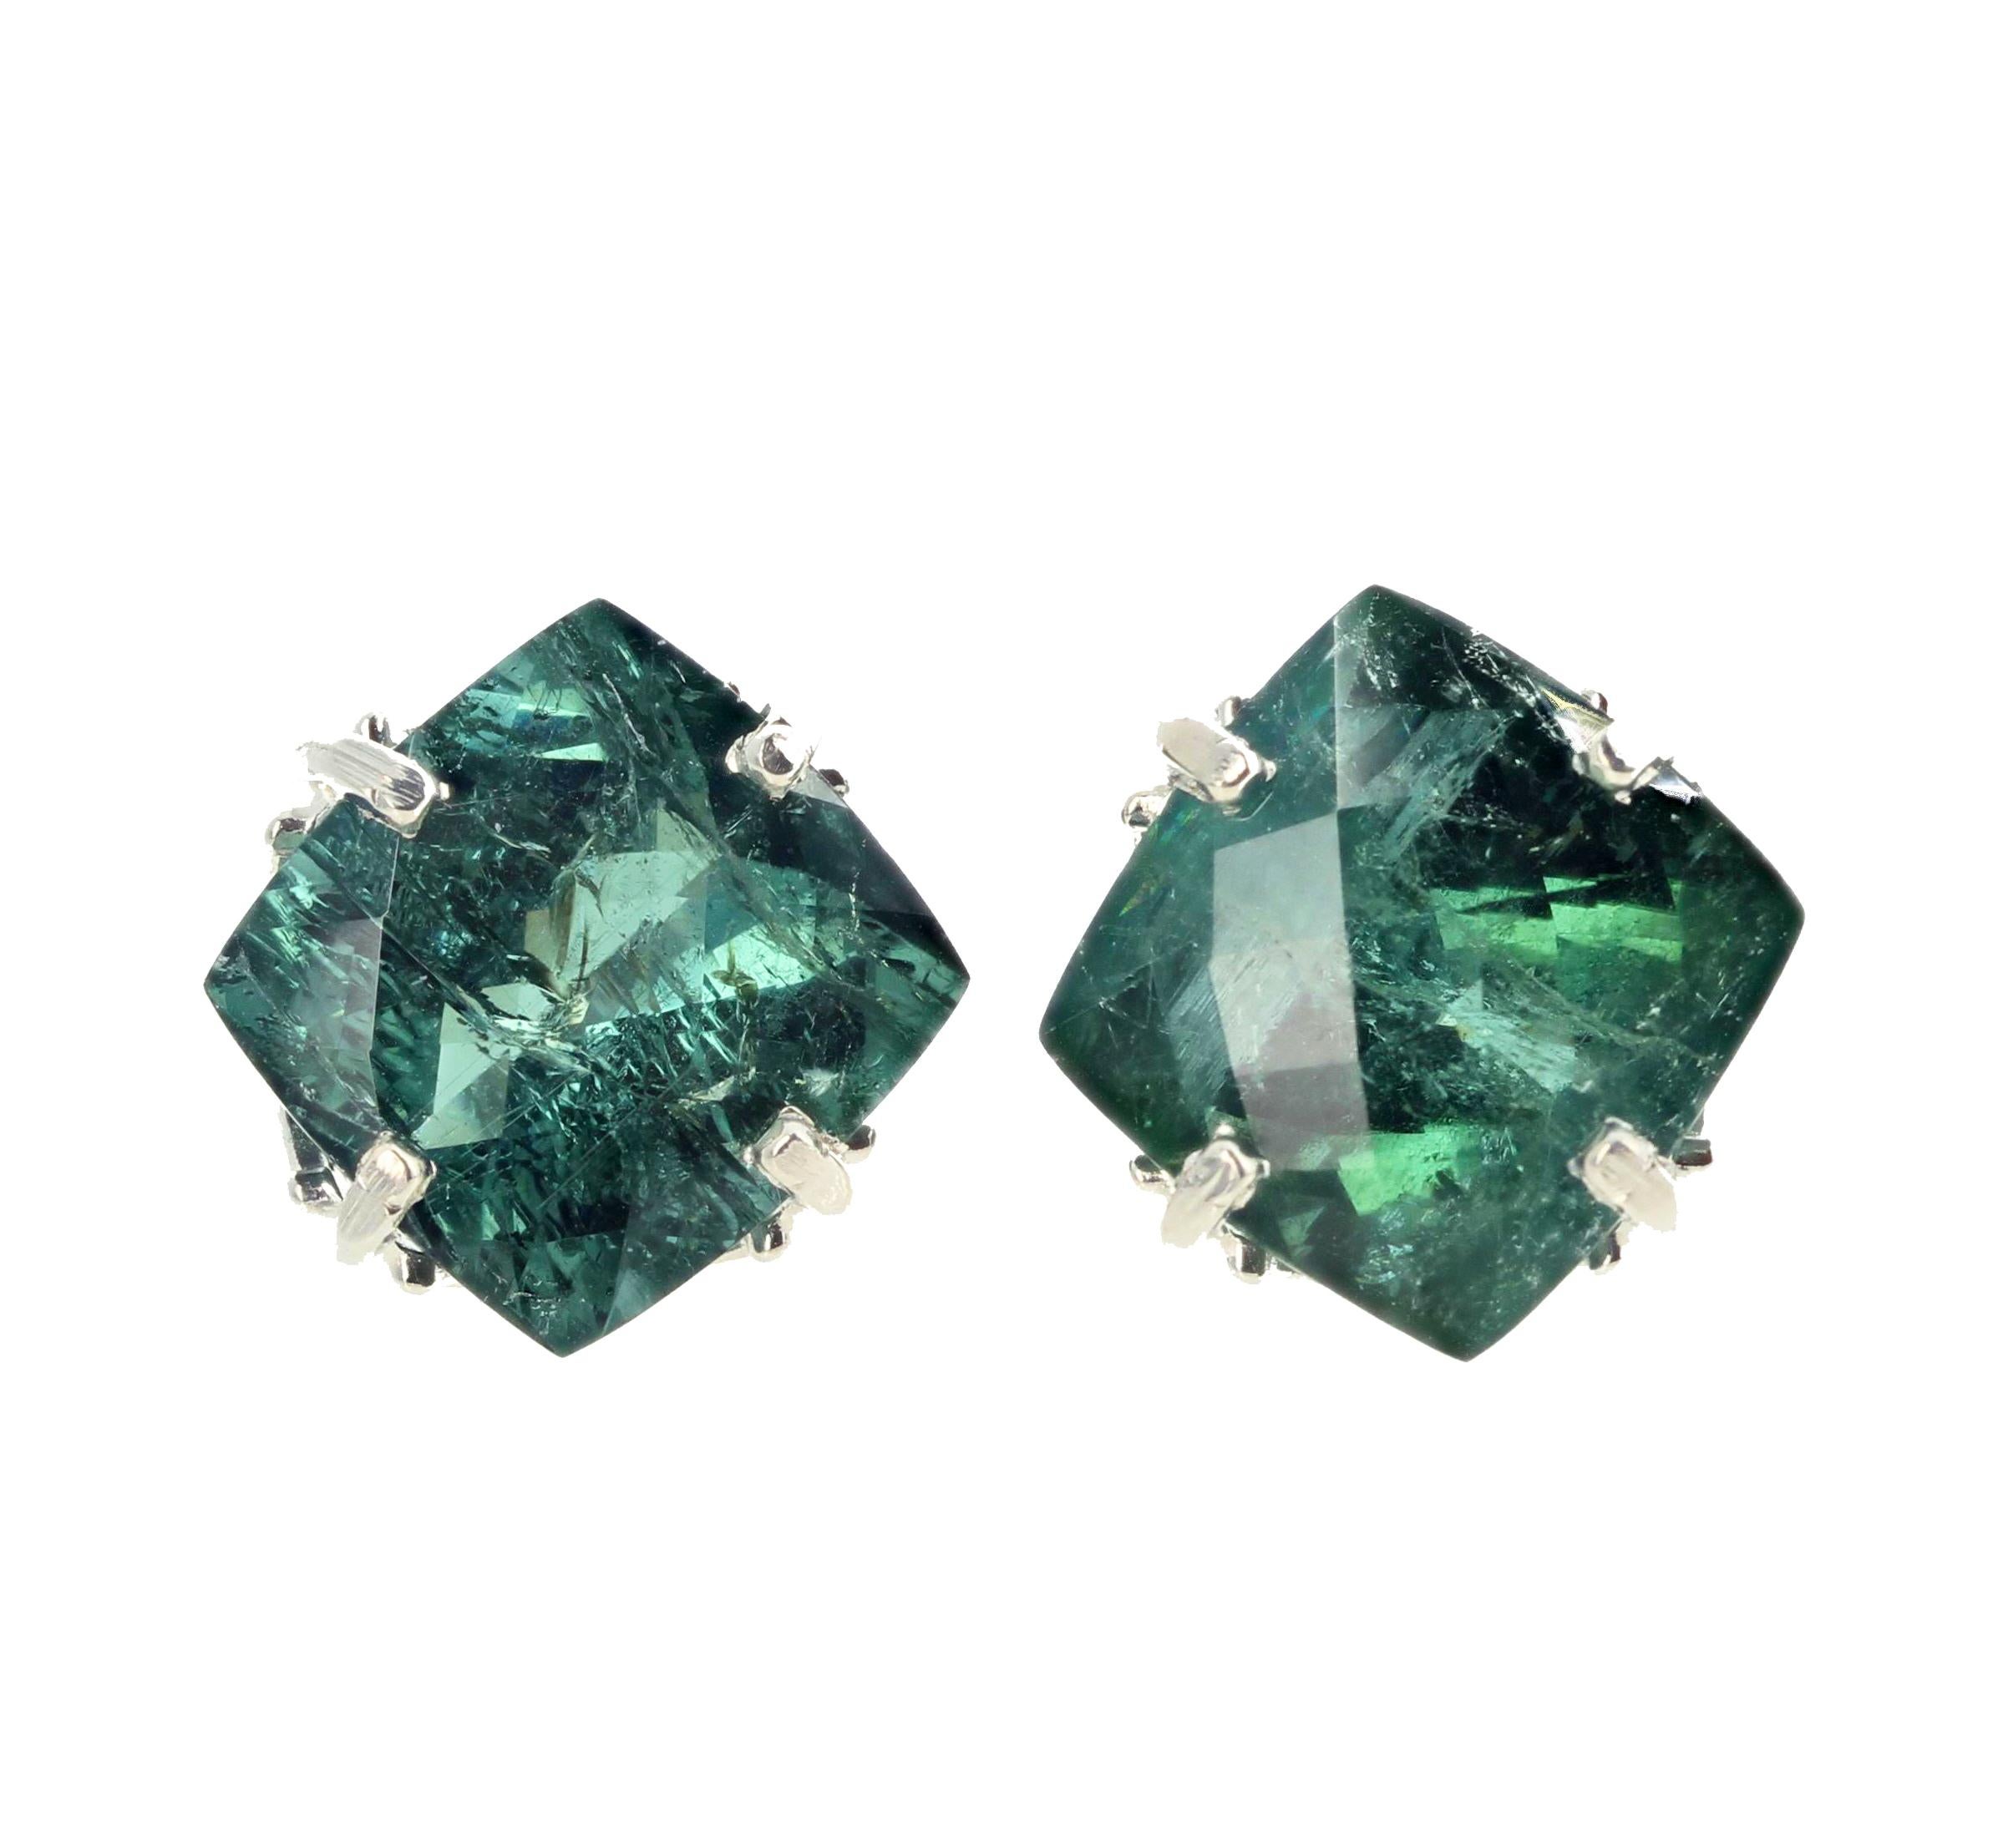 Brilliant checkerboard gem cut sparkling natural real green Tourmalines (15.75 carats - 12 mm x 12 mm) set in sterling silver stud earrings.  These are perfect for day into night events.  